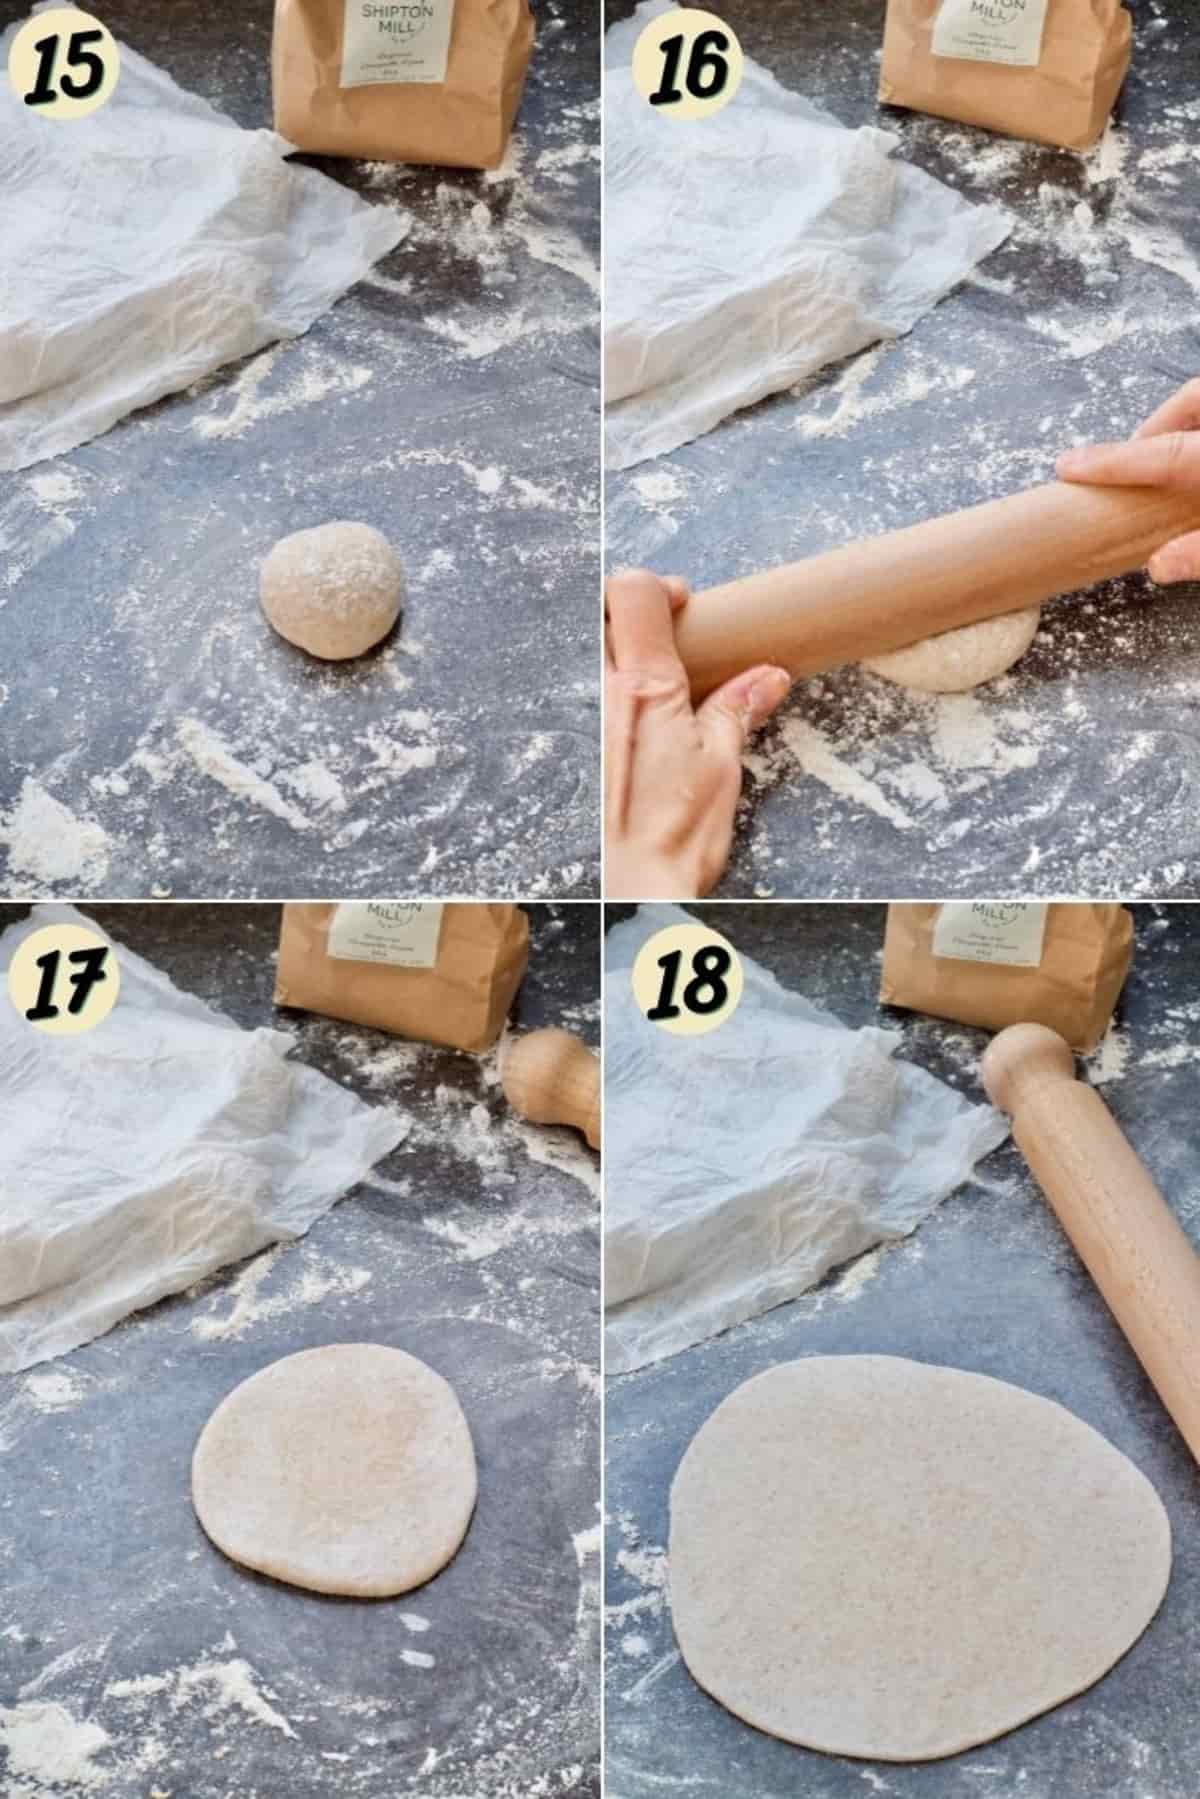 Rolling out the dough to make round flatbread.